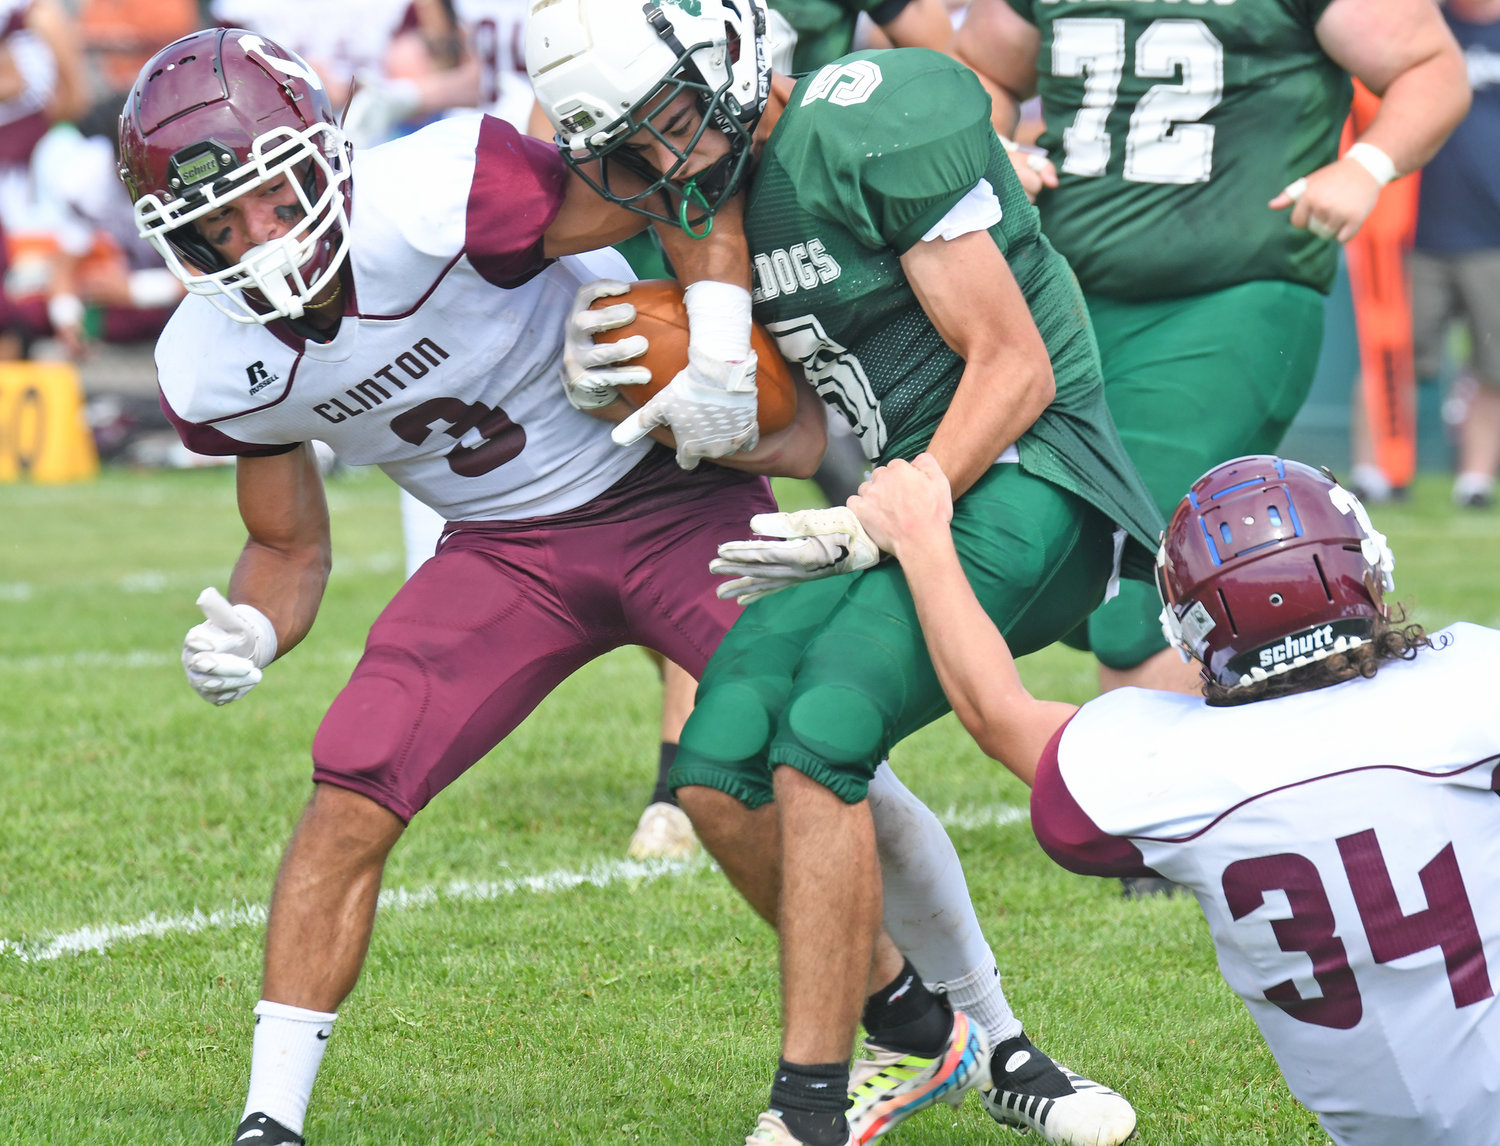 As Clinton's Benjamin Pelkey tries to drag down Westmoreland/Oriskany's Cameron Rautenstrauch, teammate Cameron Maline tries to strip the ball from his hand during Saturday afternoon's non-league game in Westmoreland. The Warriors won 28-6.